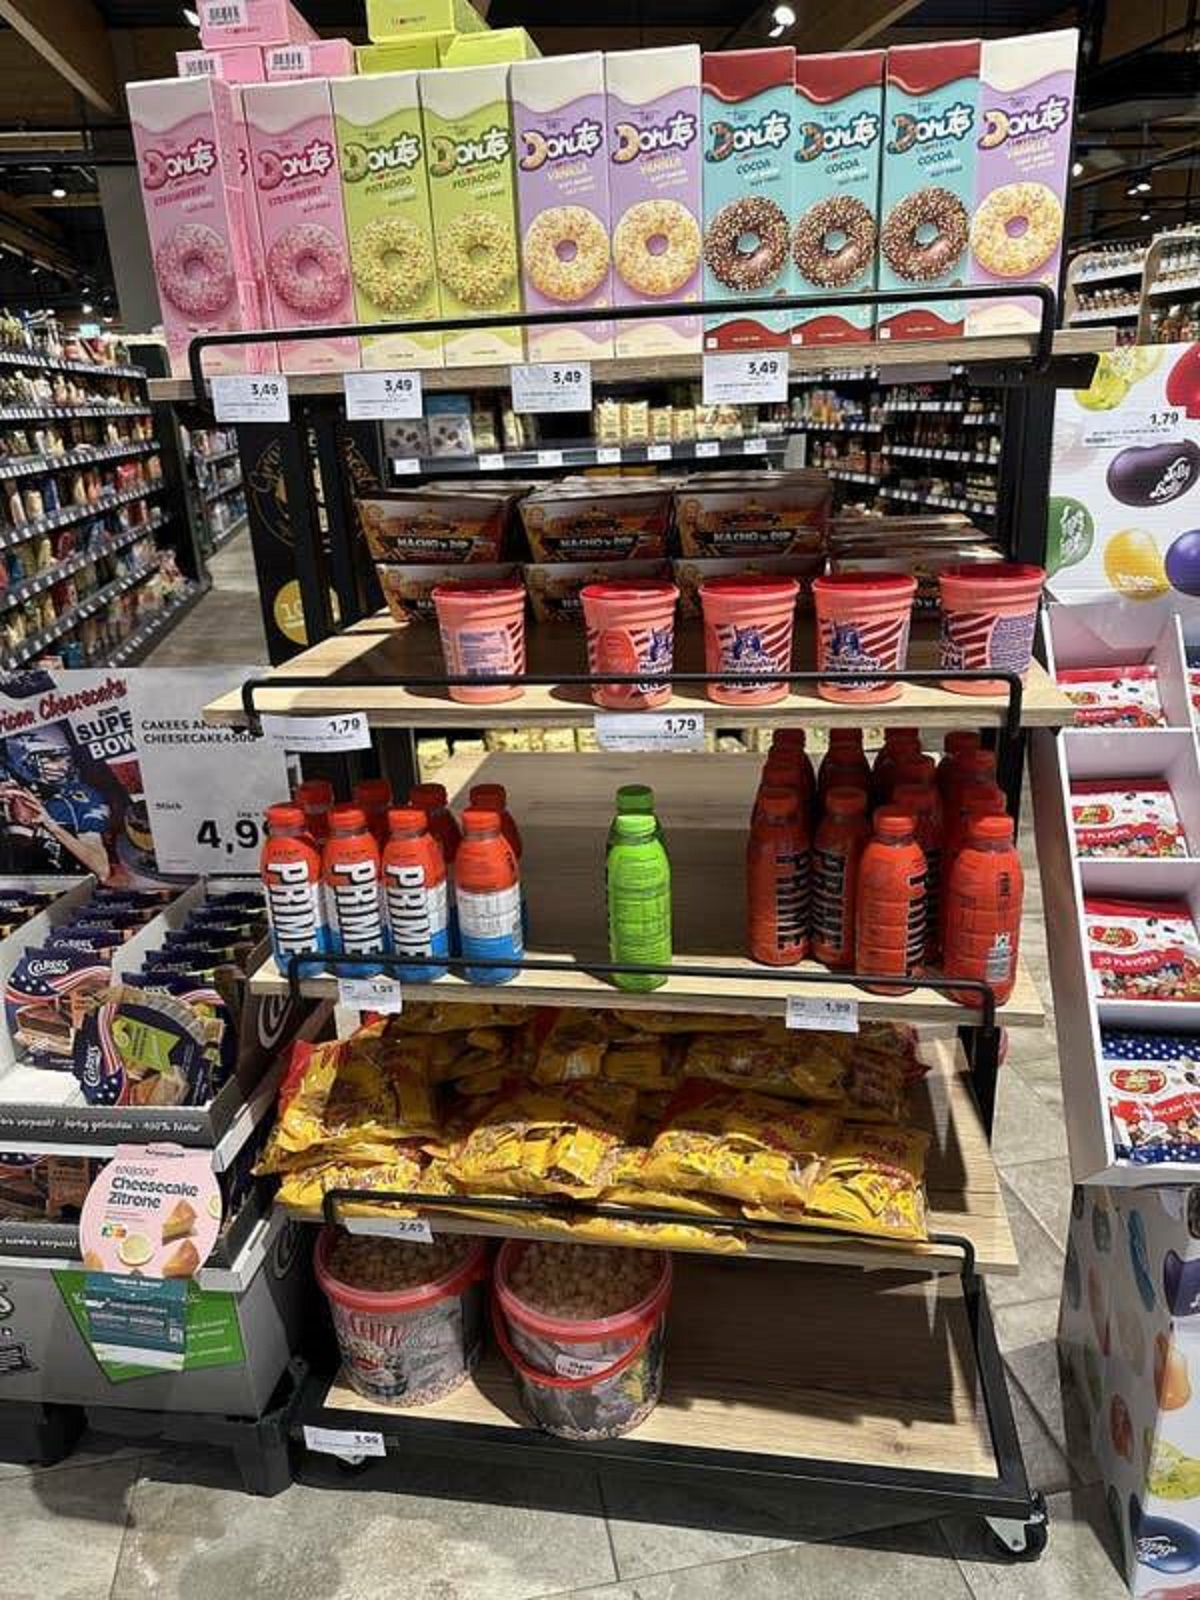 Here's another "American Super Bowl" section found in a German grocery store: